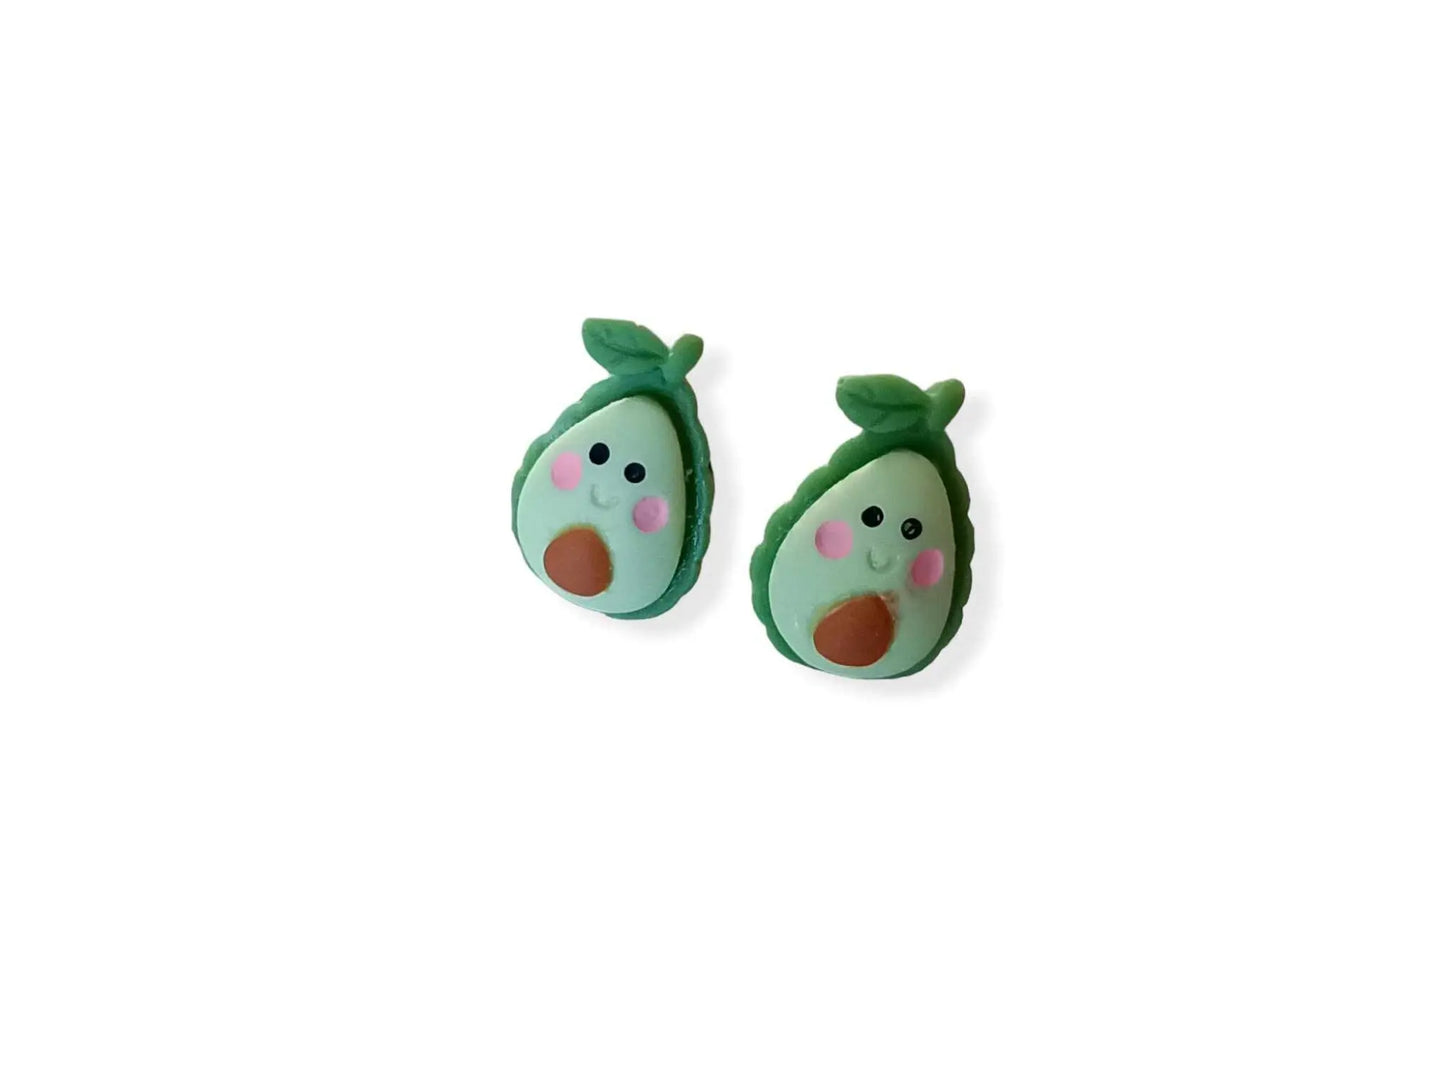 Adorable Baby Avocado Resin Earrings - A Unique, Fun, and Quirky Accessory!